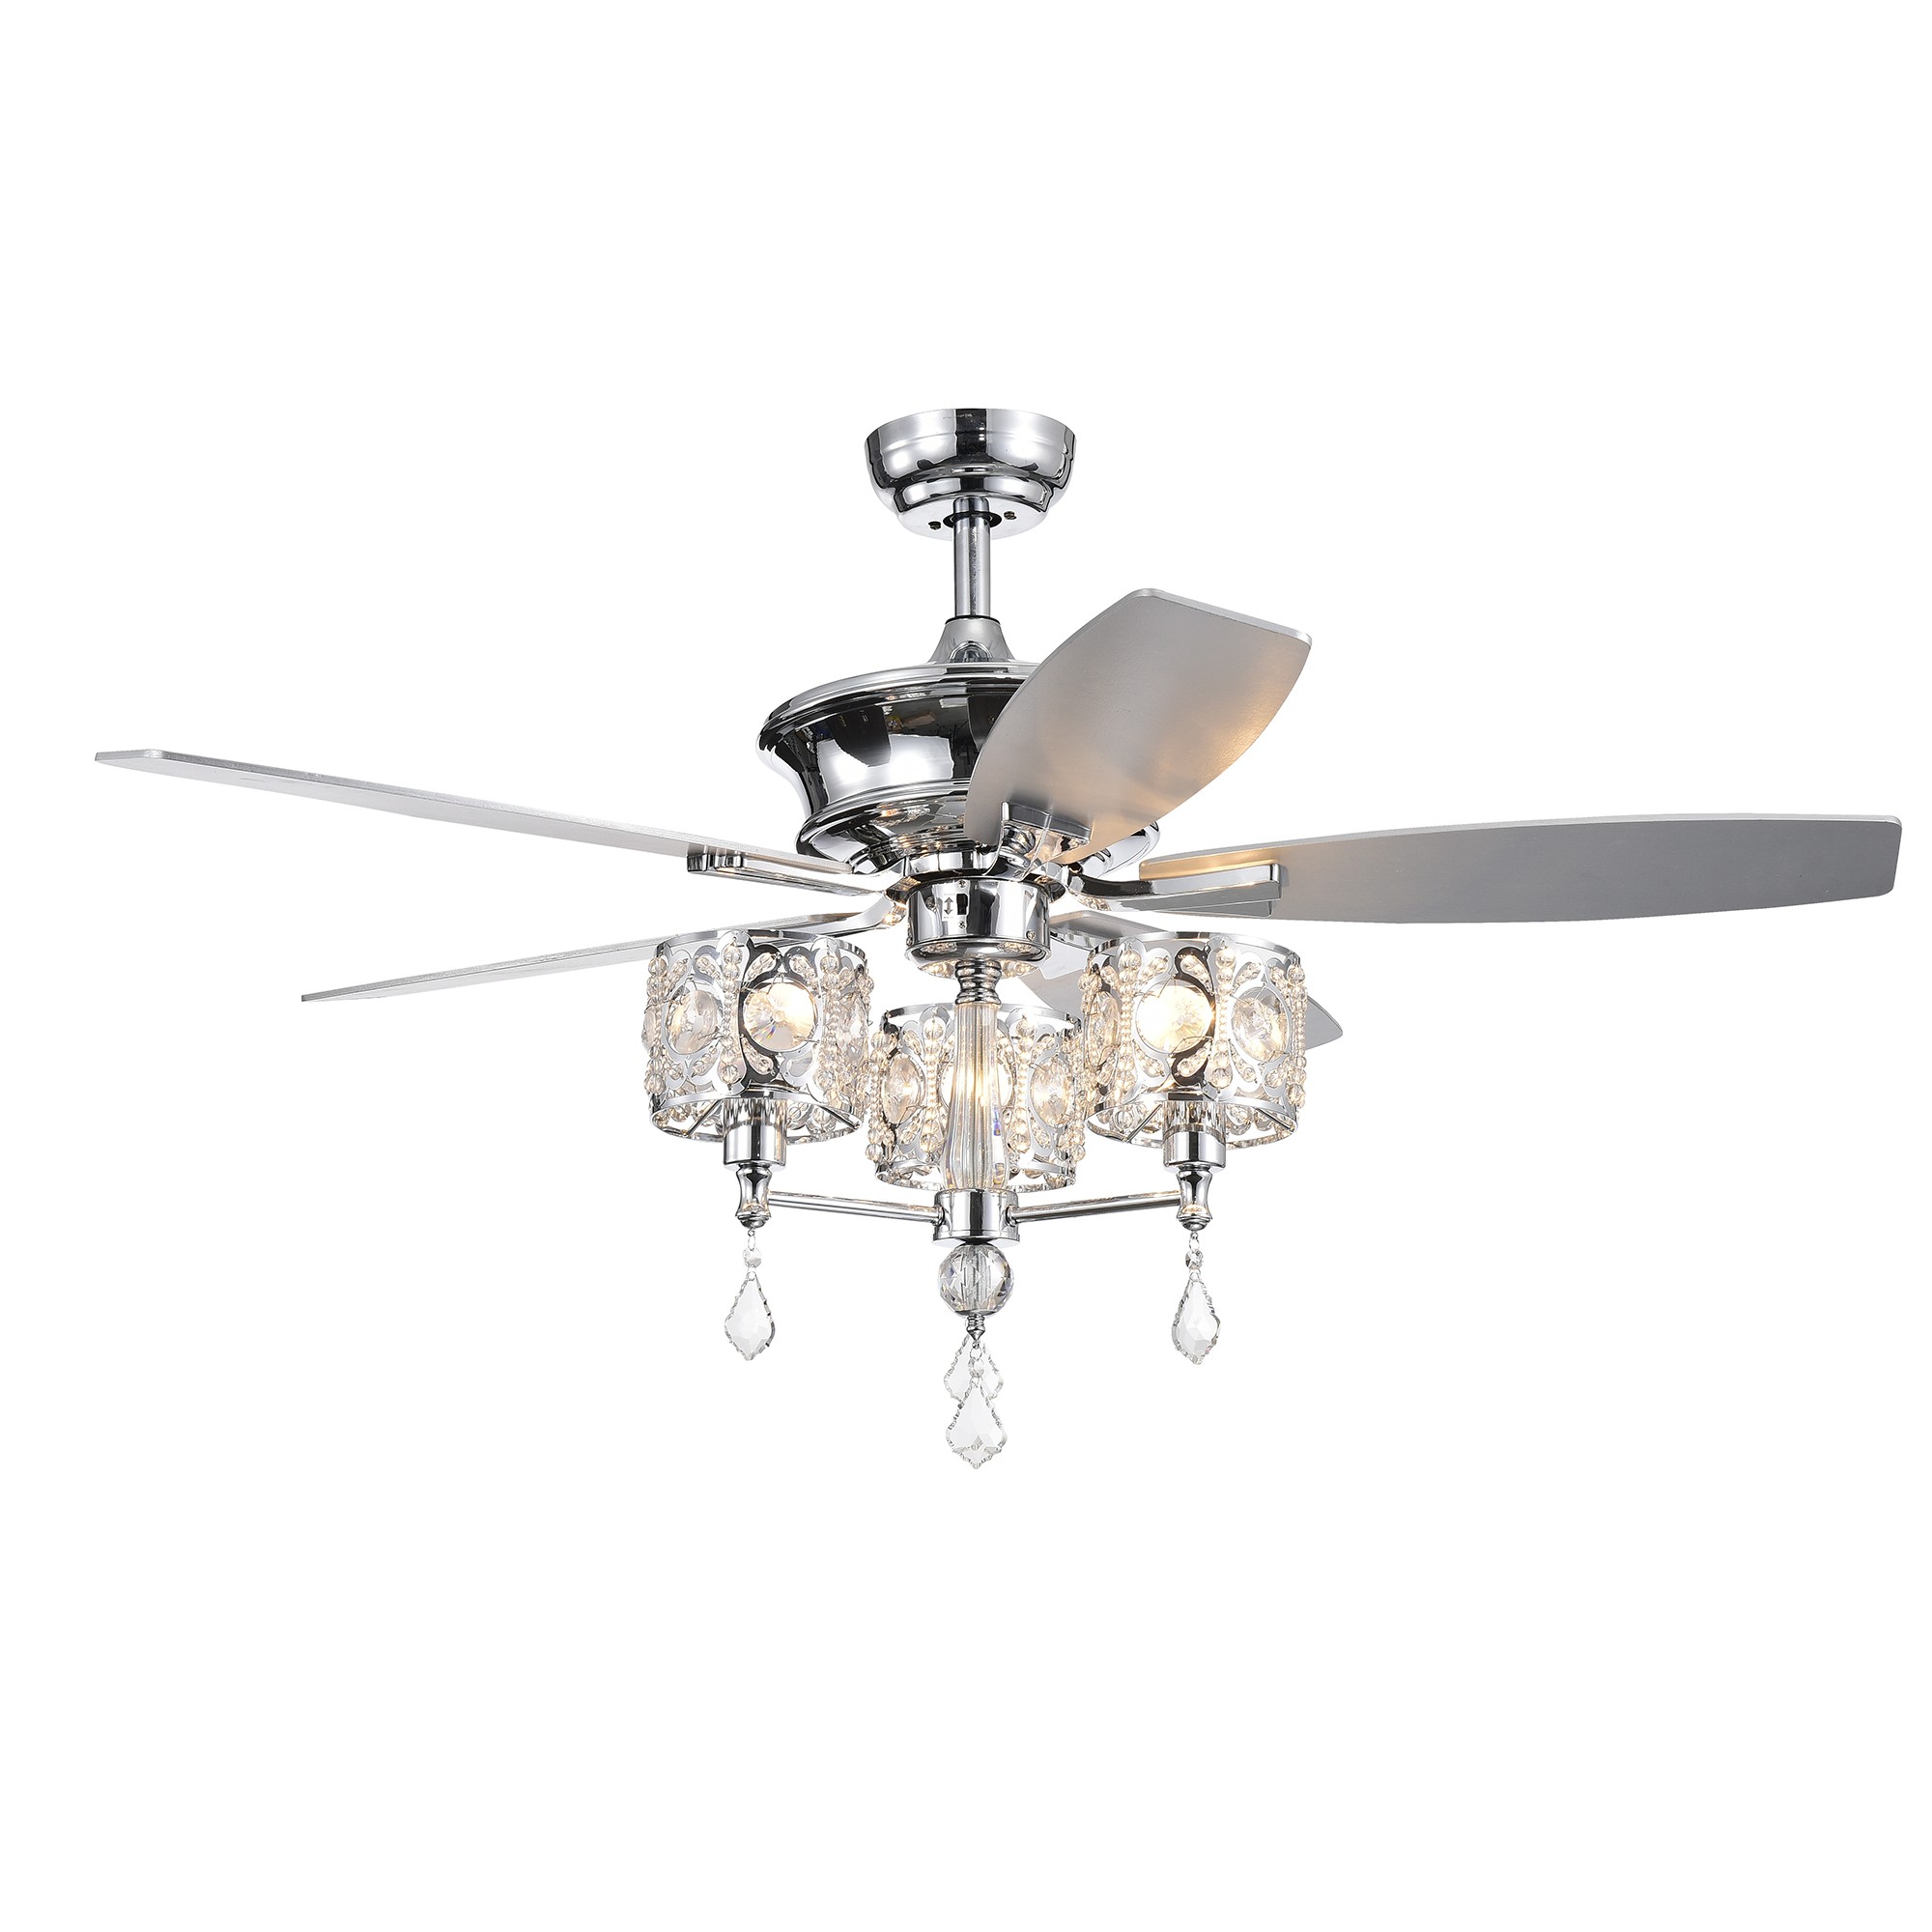 Miramis 52-inch Chrome Ceiling Fan with Crystal Chalice Chandelier